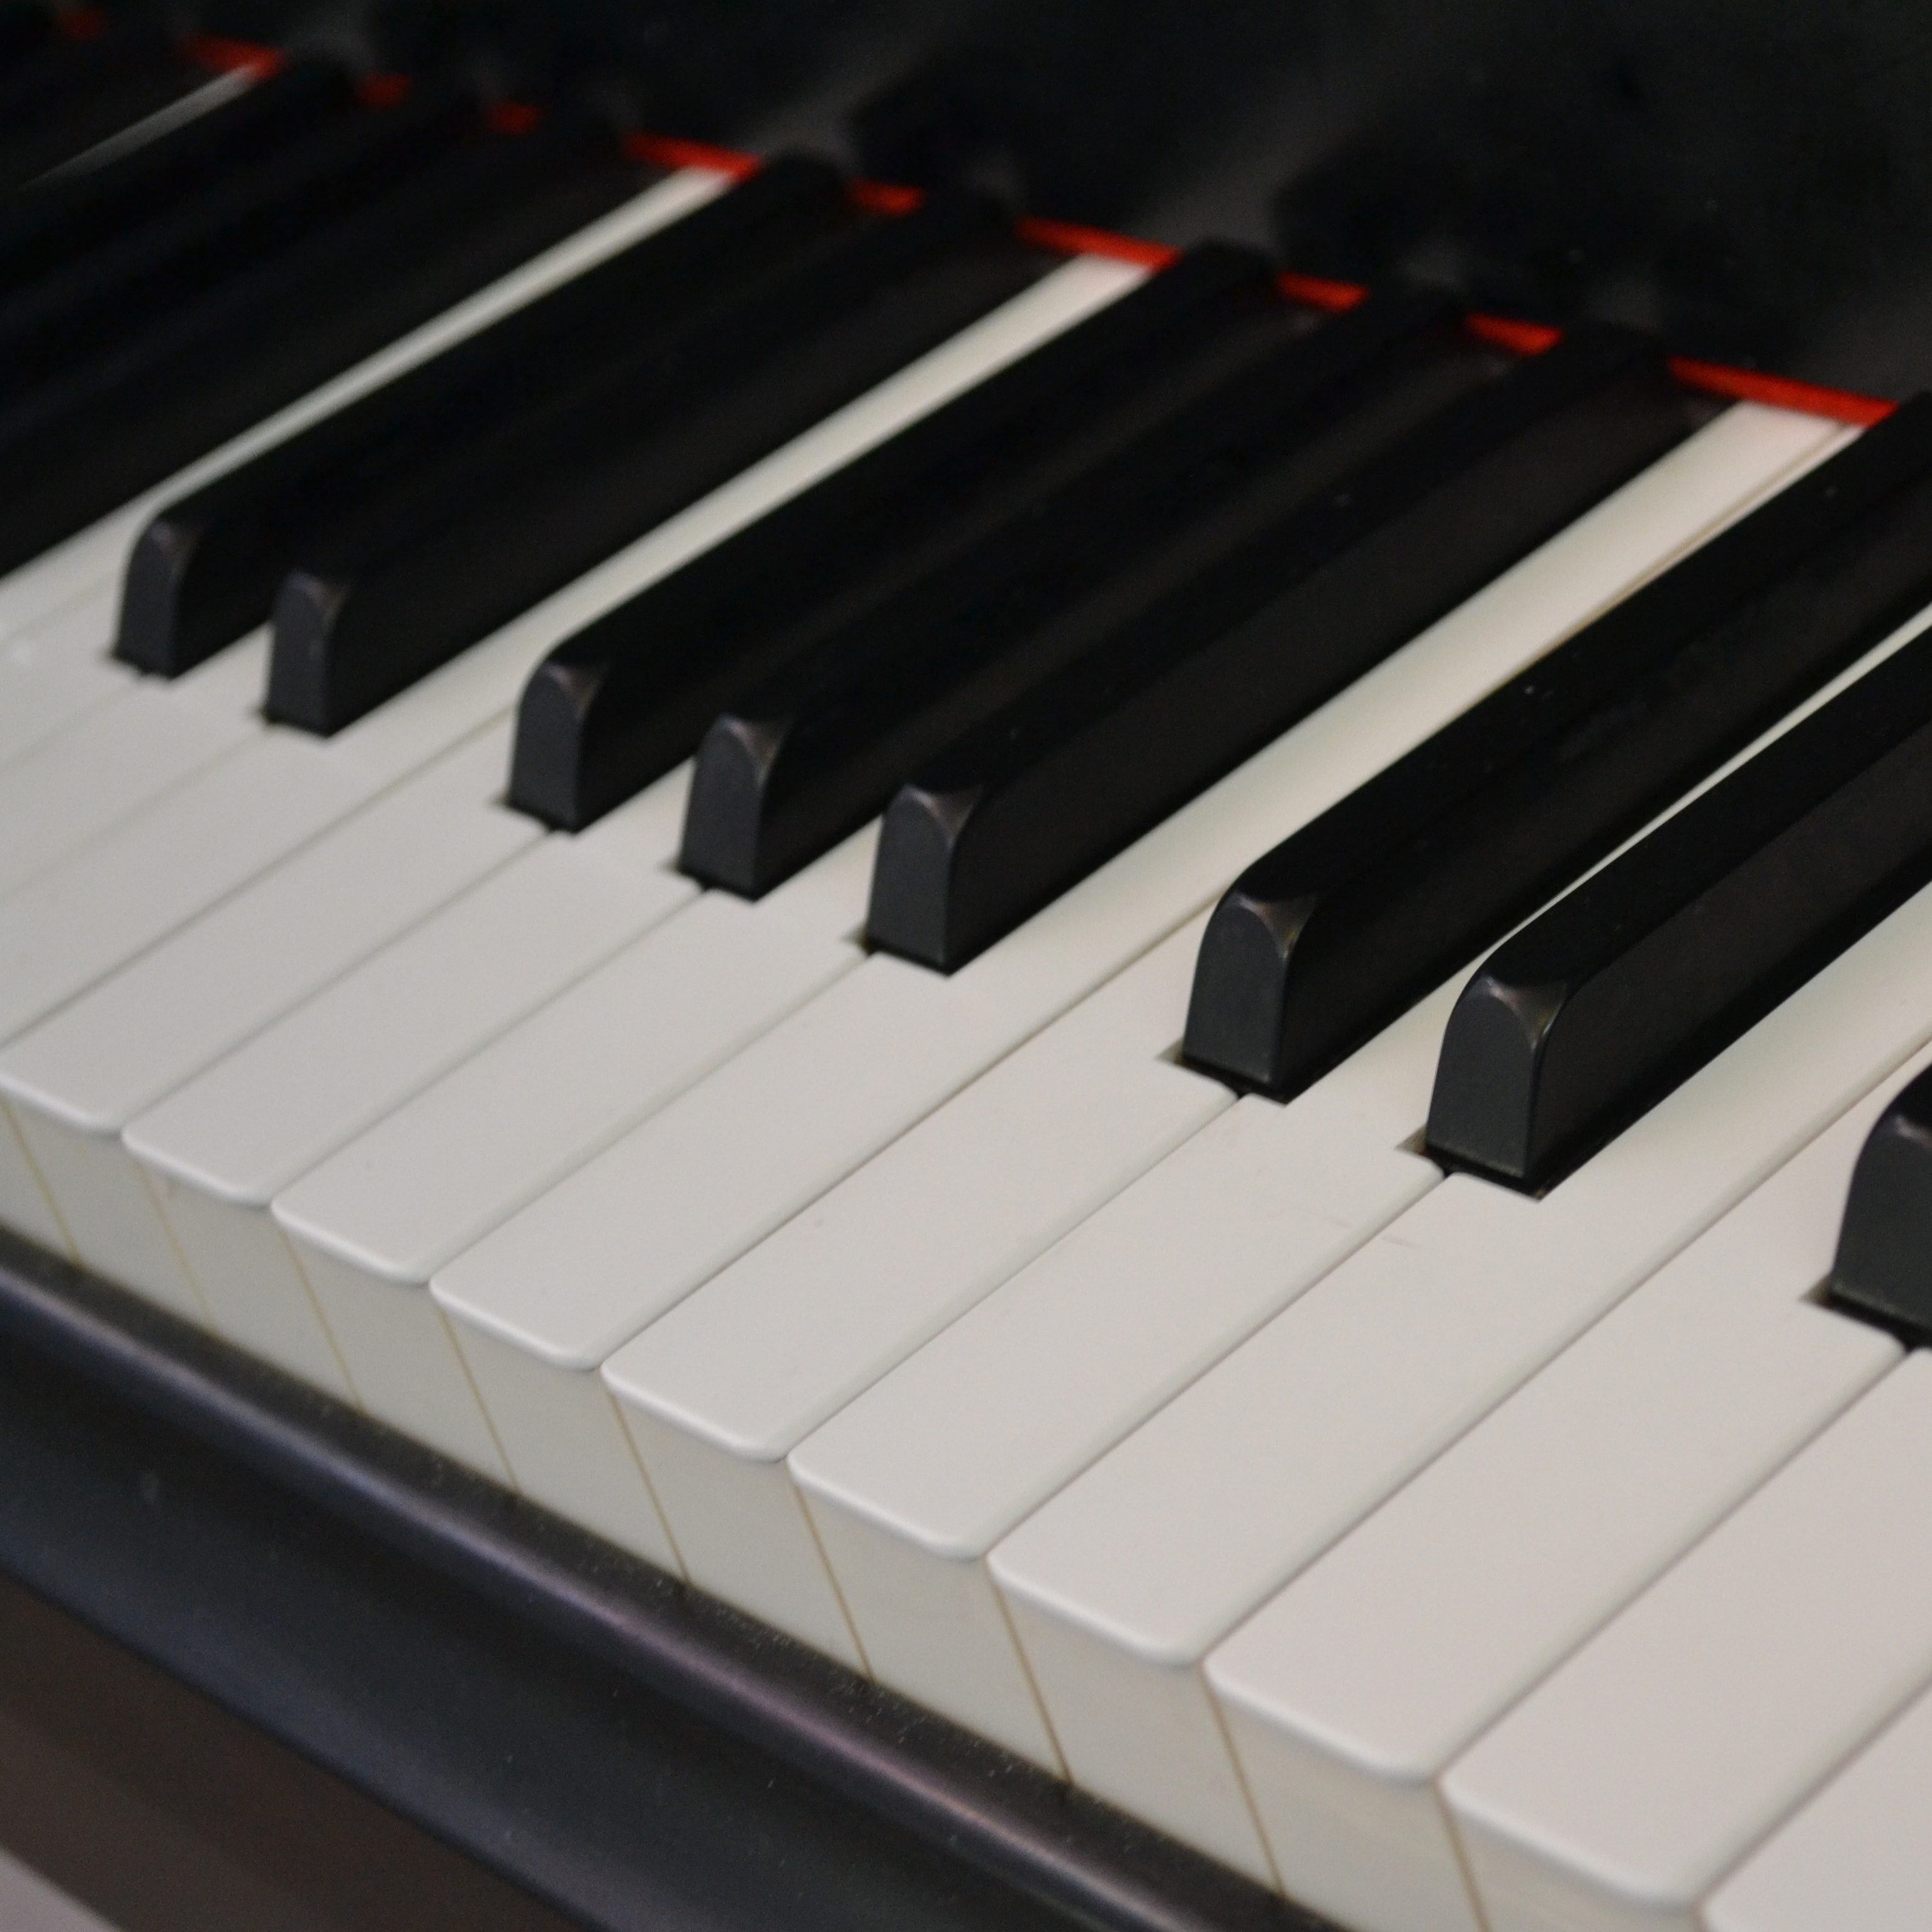 30 Unforgettable Piano Melodies for Instant Relaxation